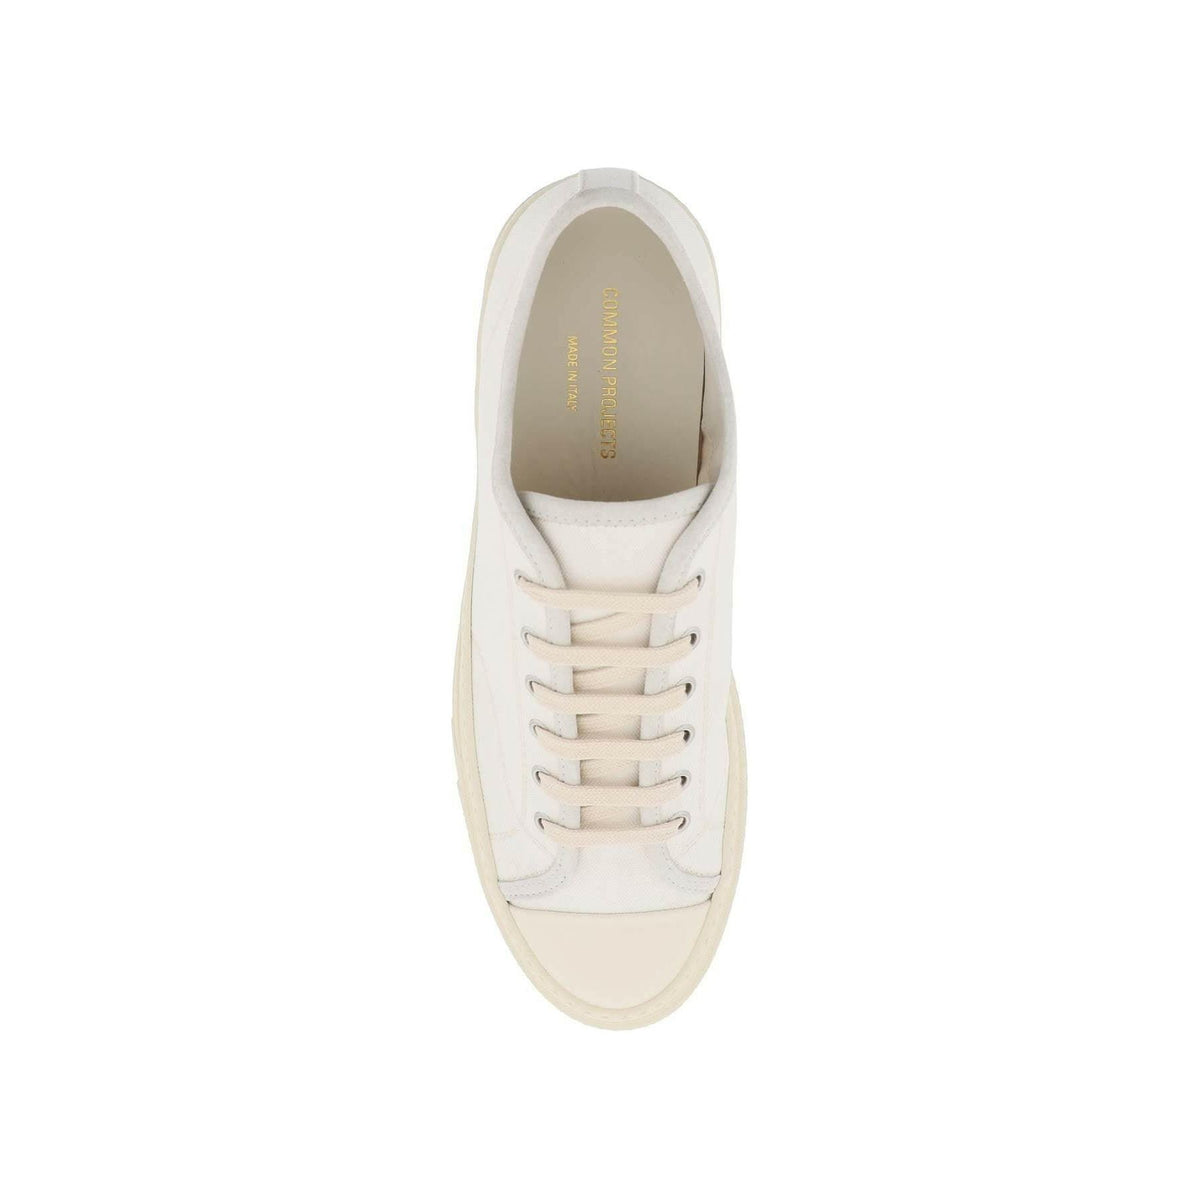 COMMON PROJECTS - Off-White Tournament Canvas Sneakers - JOHN JULIA